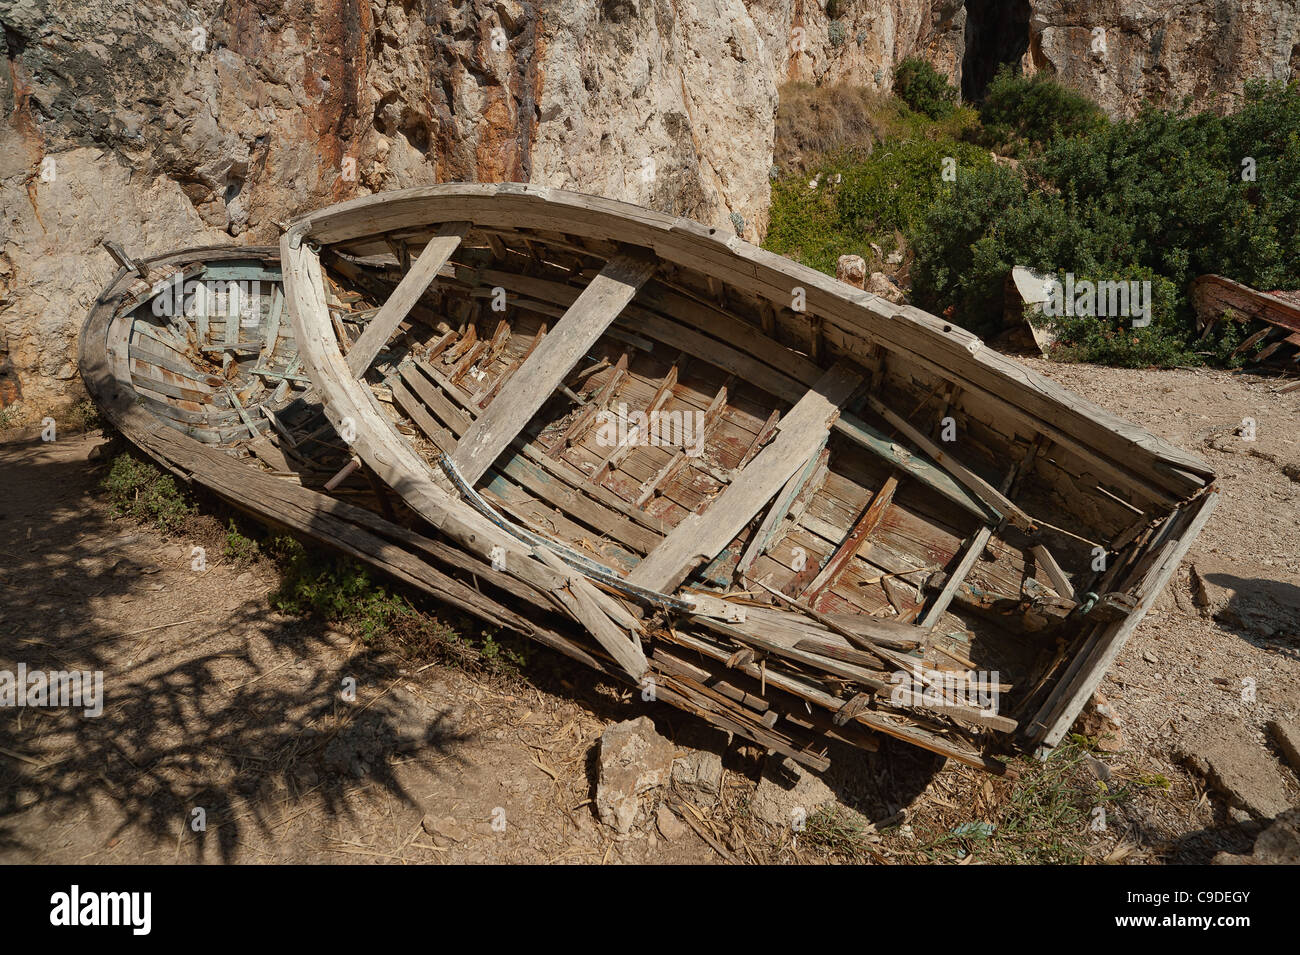 Old wrecked wooden boats. Stock Photo